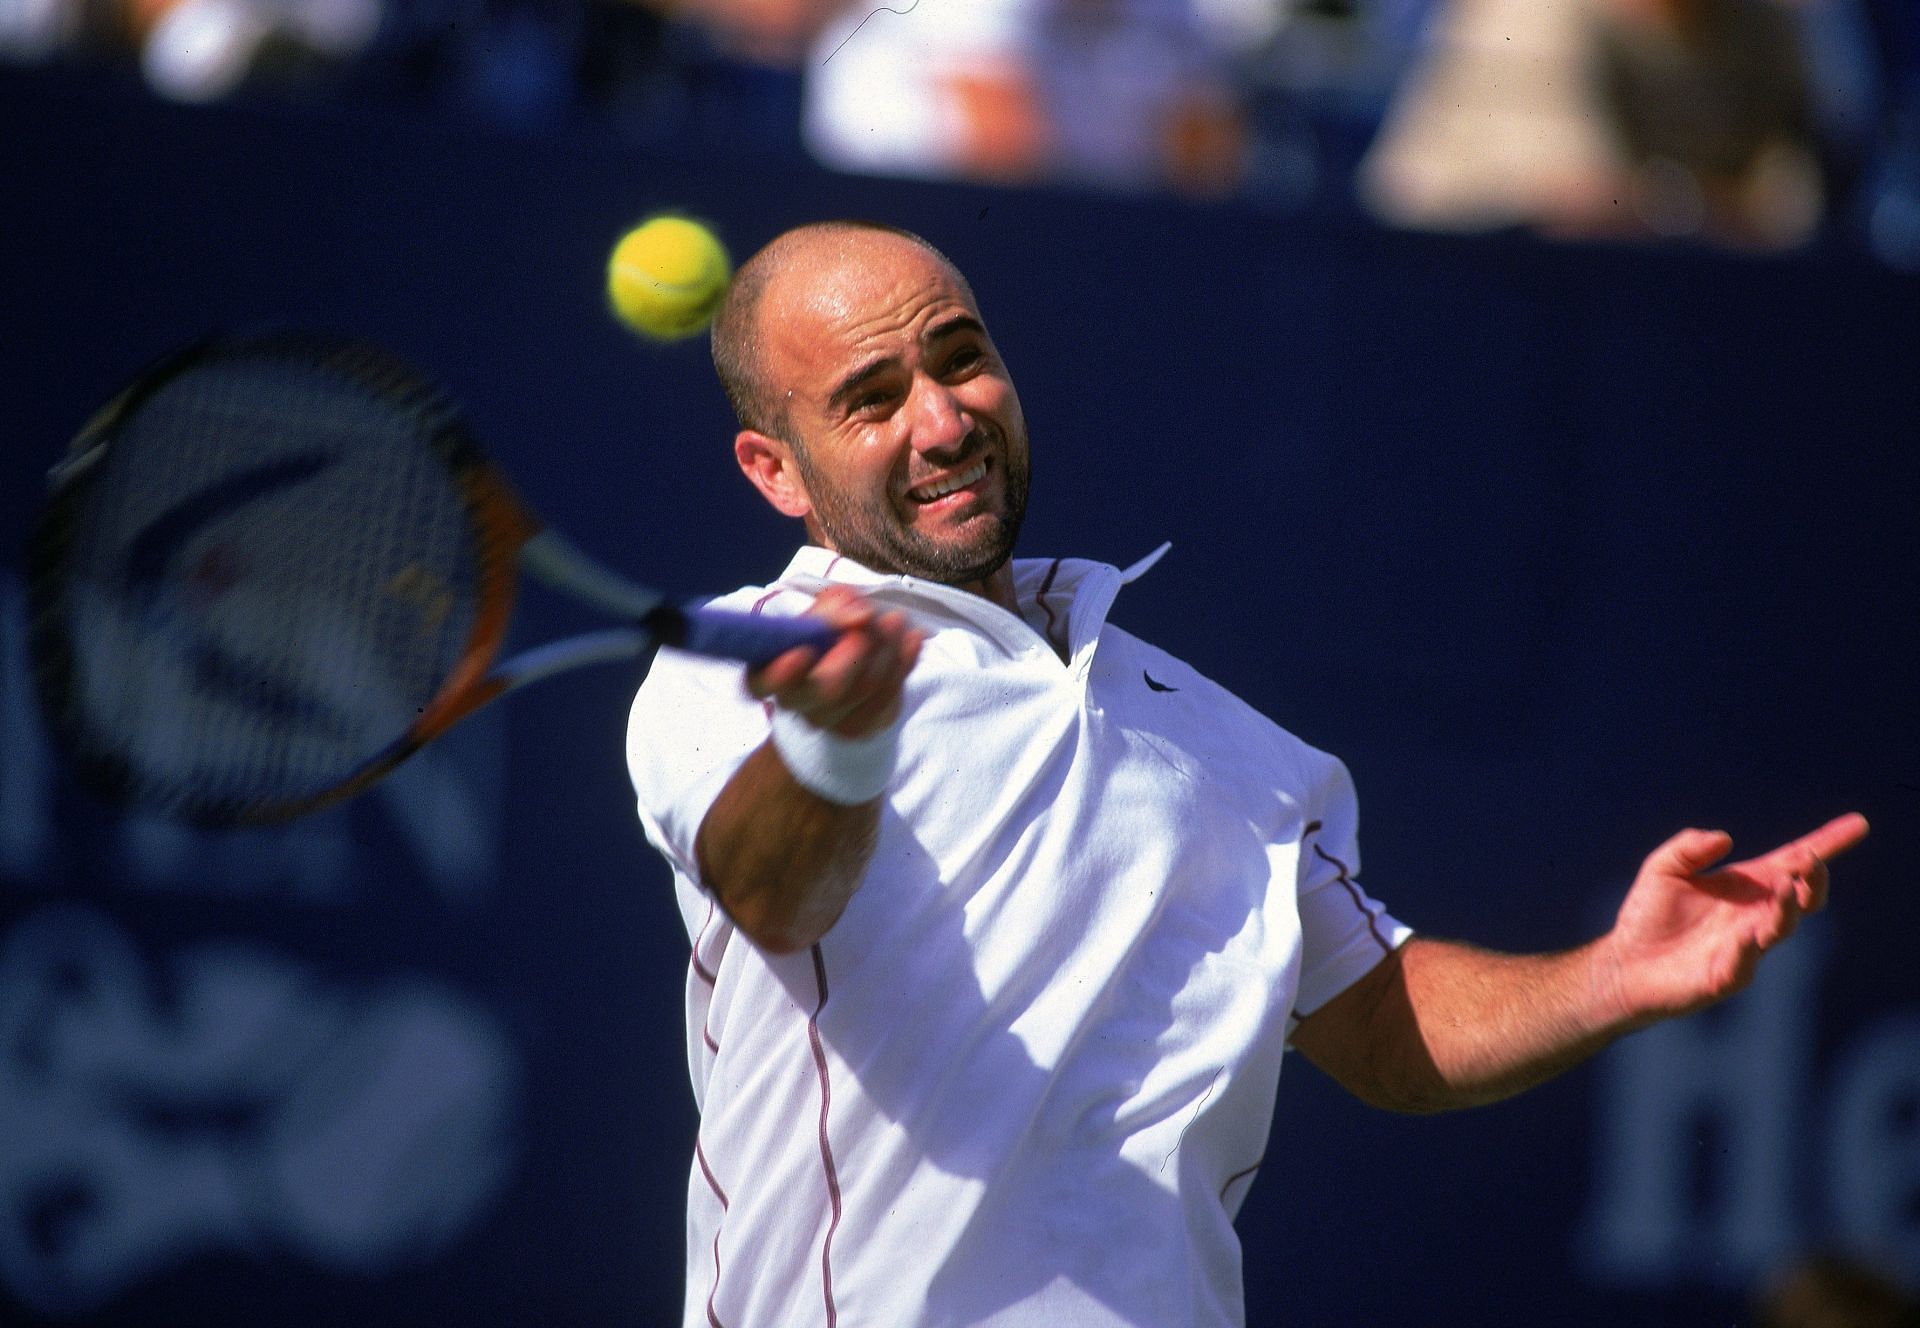 Andre Agassi at the 2000 US Open